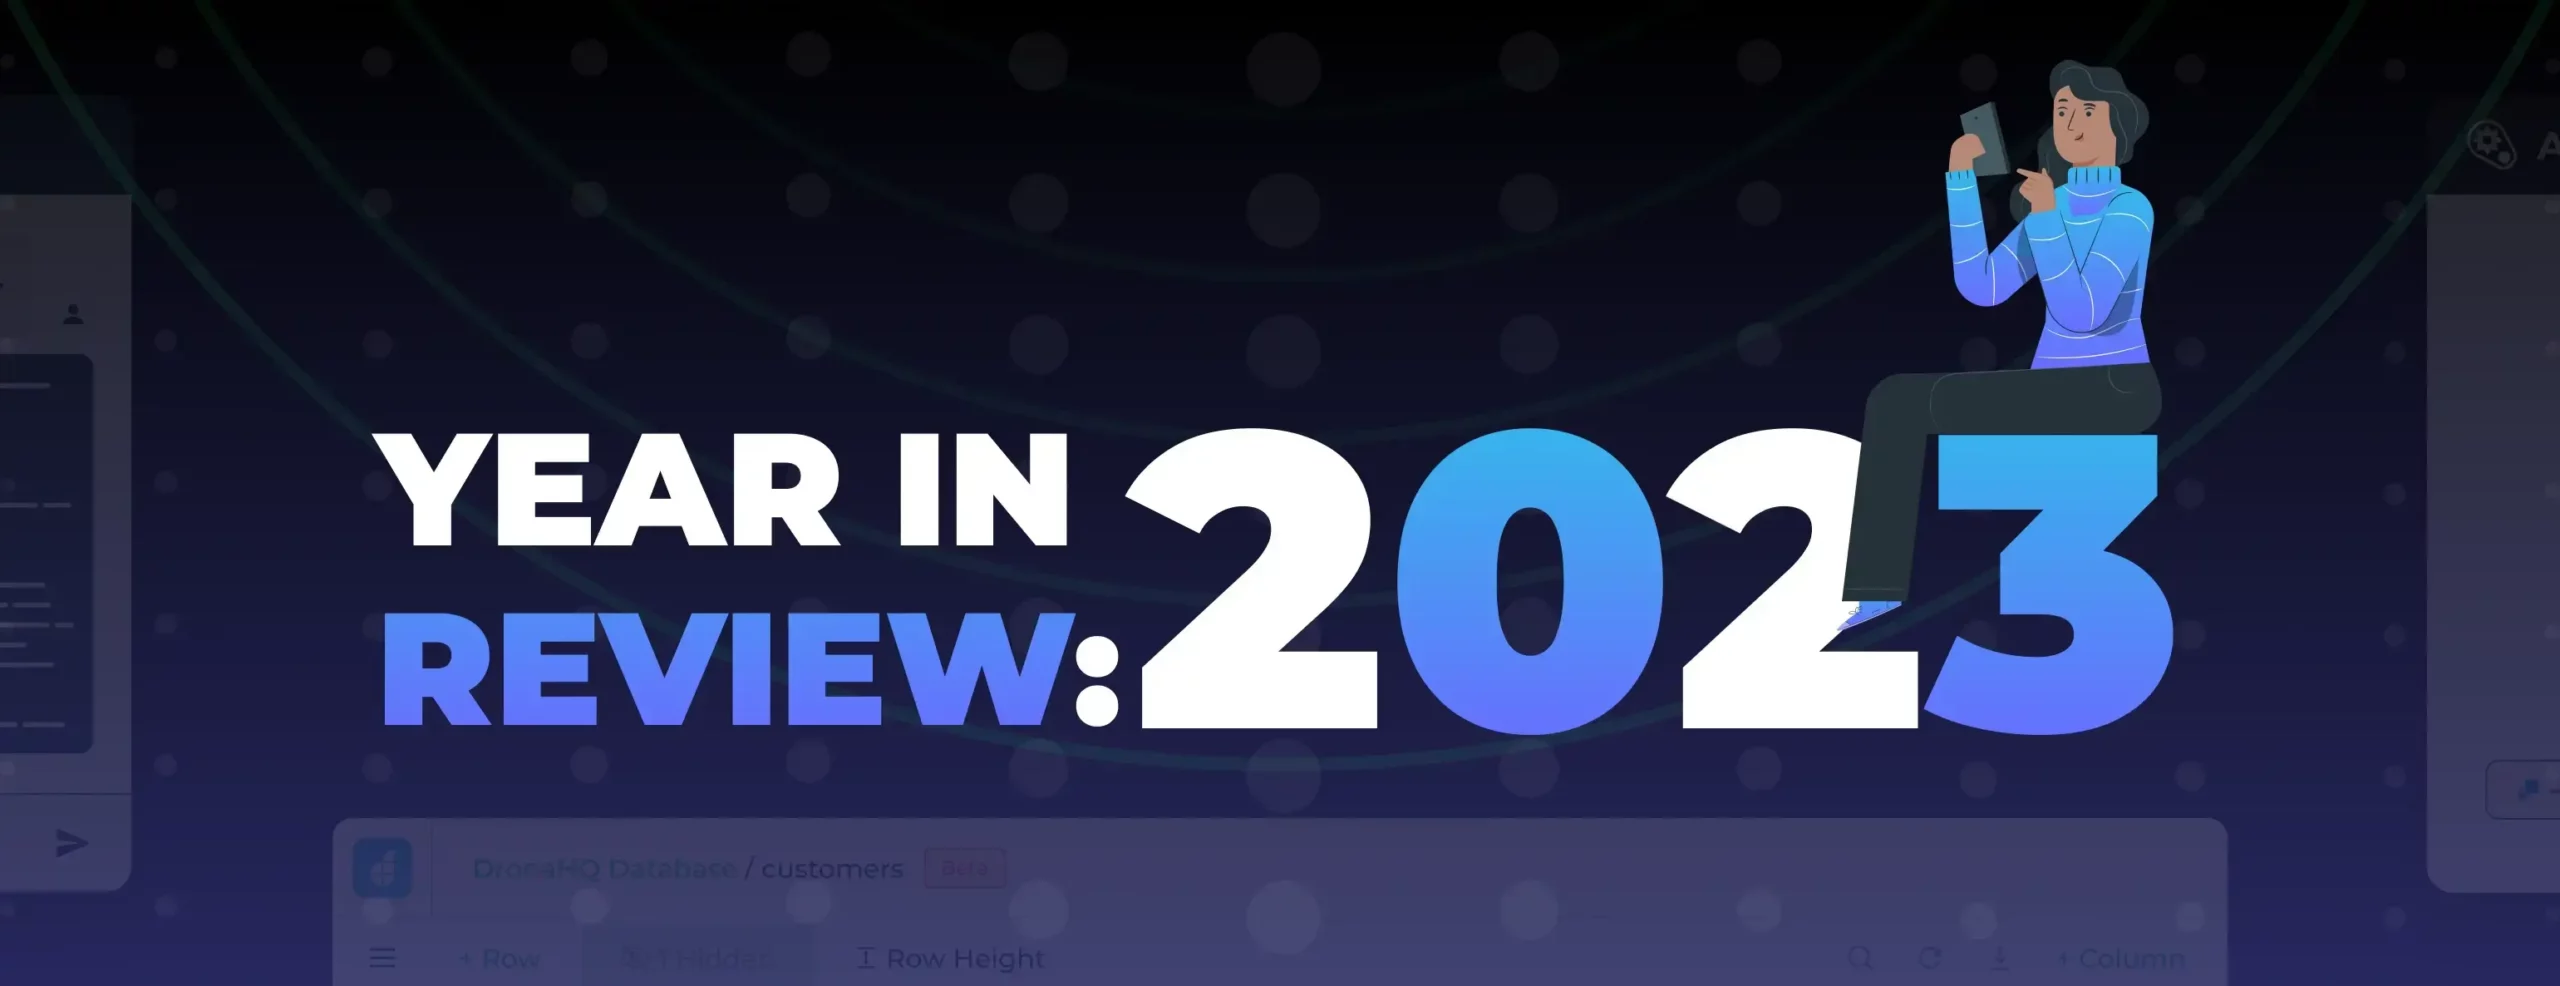 2023 Recap: DronaHQ’s Year in Review